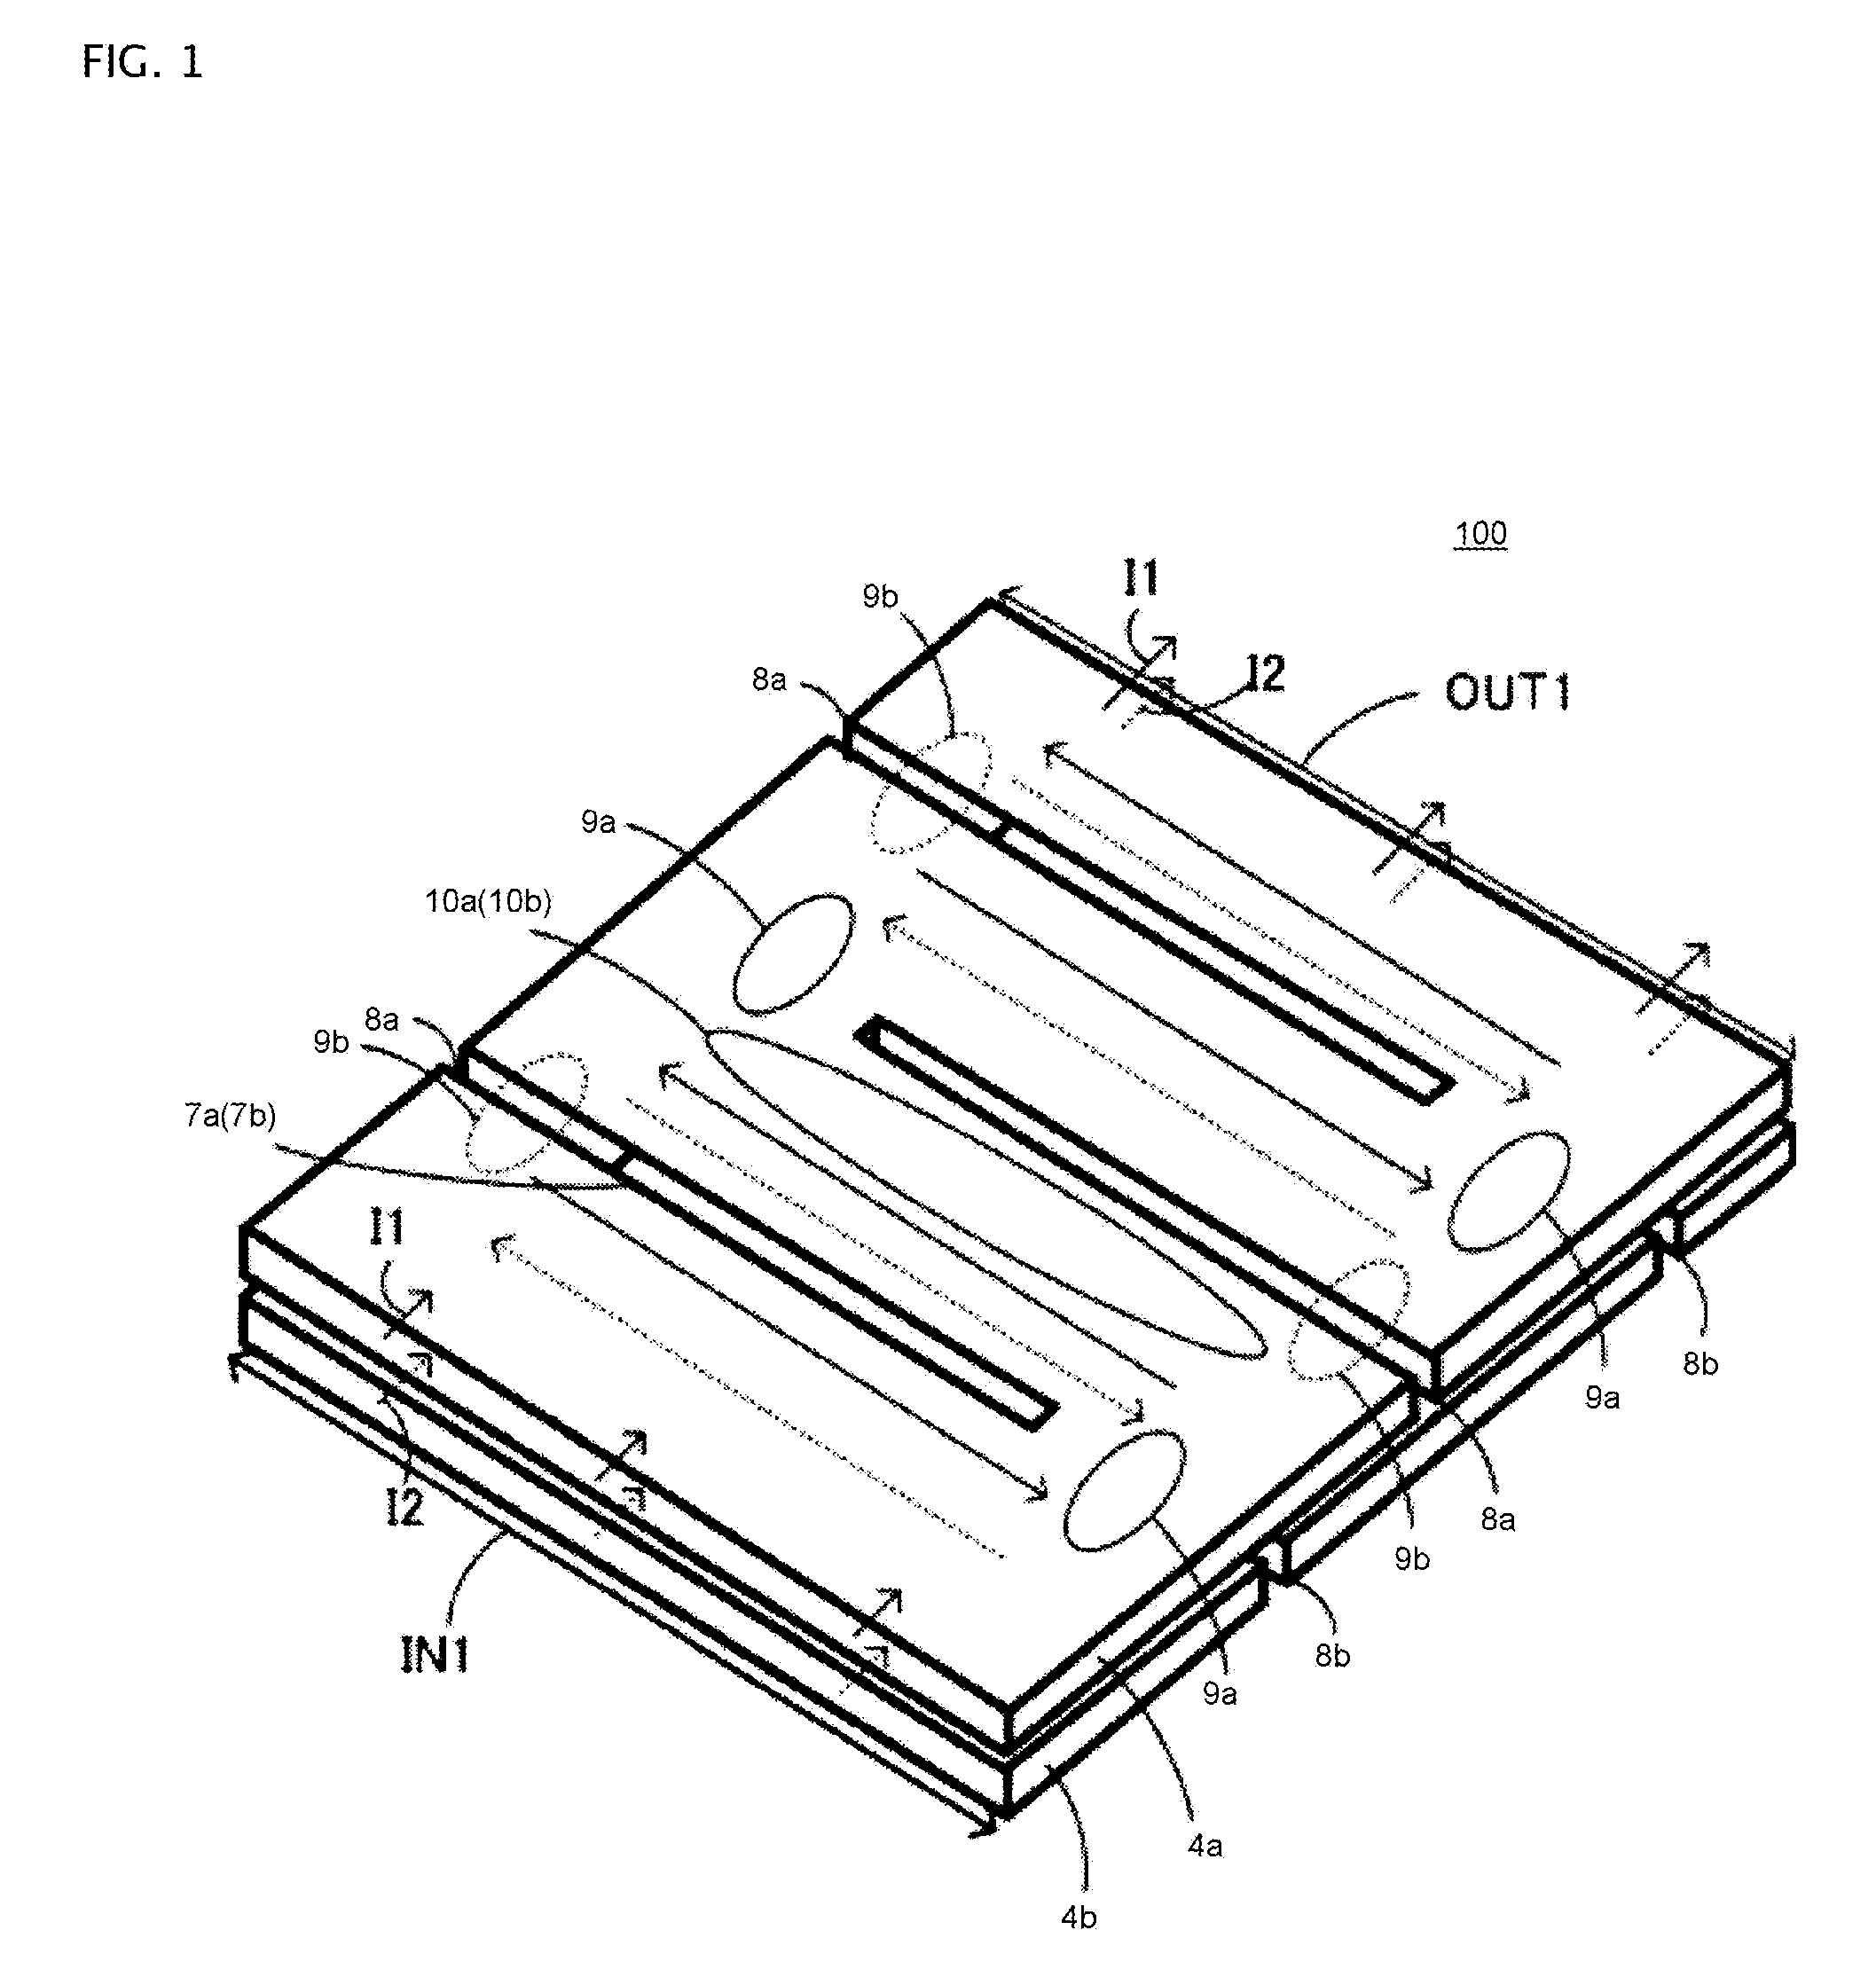 Internal wiring structure of semiconductor device